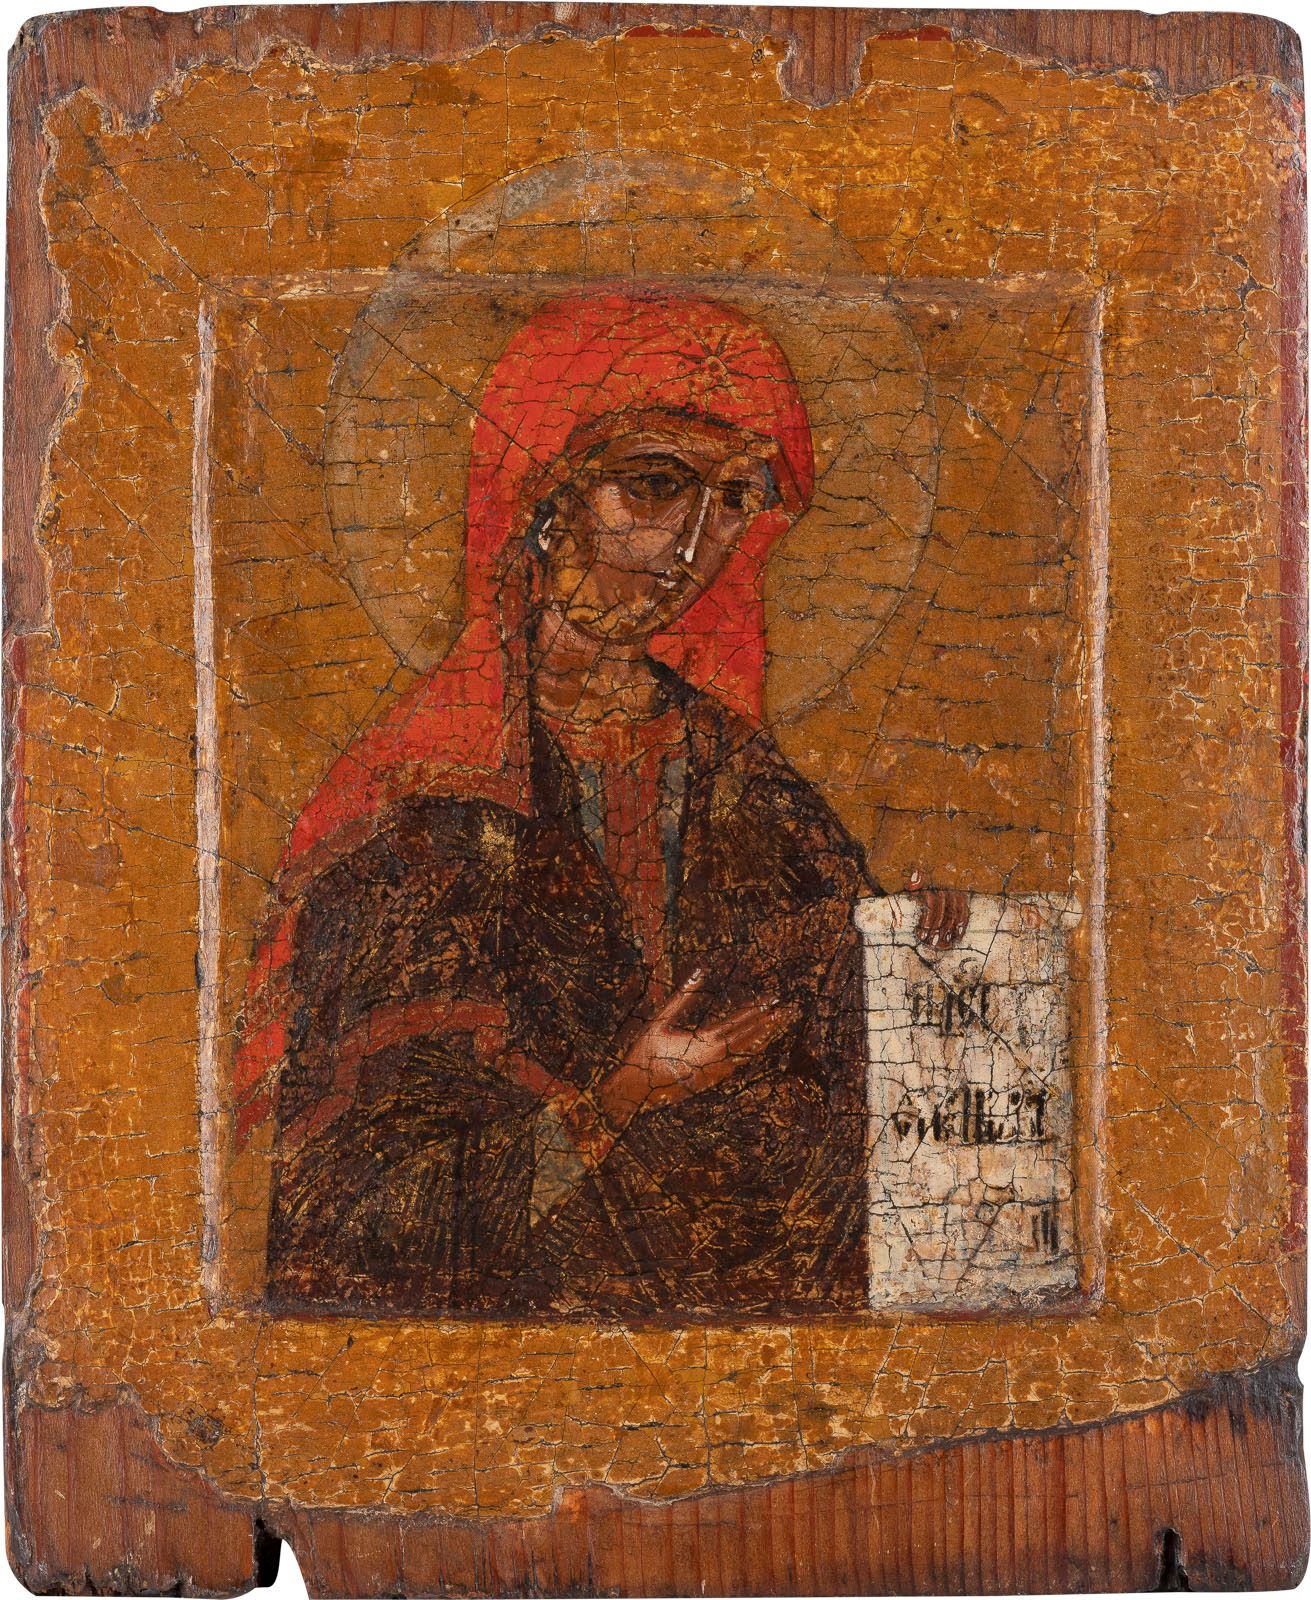 A SMALL ICON SHOWING THE MOTHER OF GOD FROM A DEISIS KLEINE IKONE, DIE DIE MUTTE&hellip;